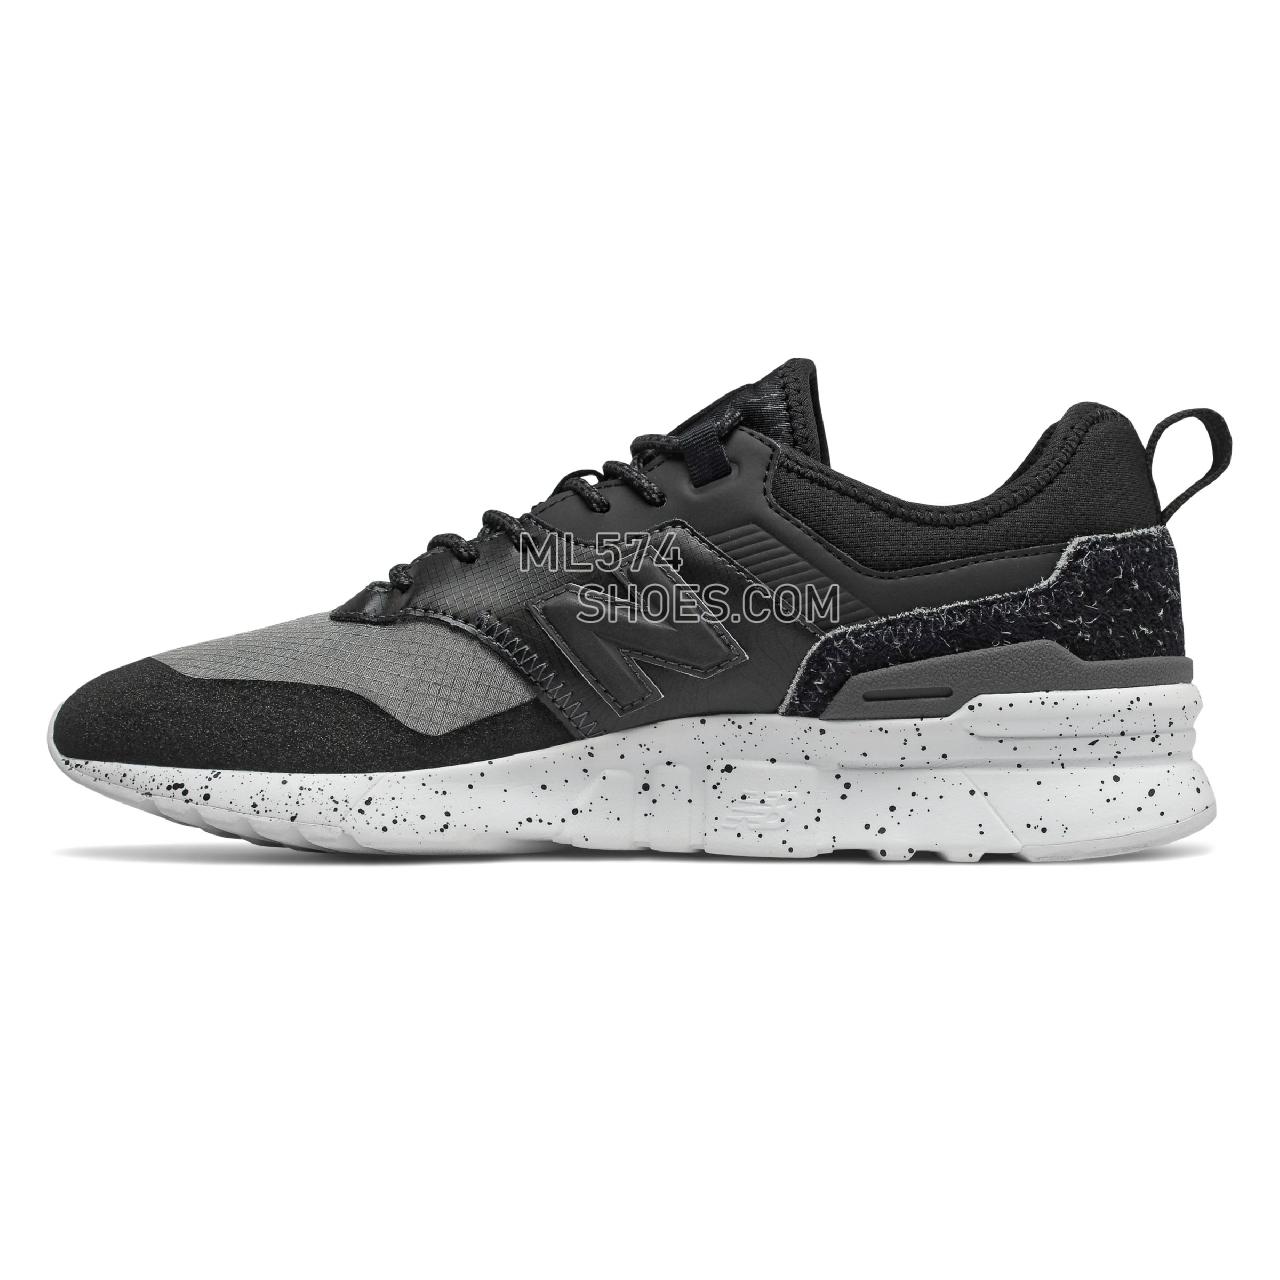 New Balance 997H Spring Hike Trail - Men's All Terrain - Black with White and Grey - CMT997HF